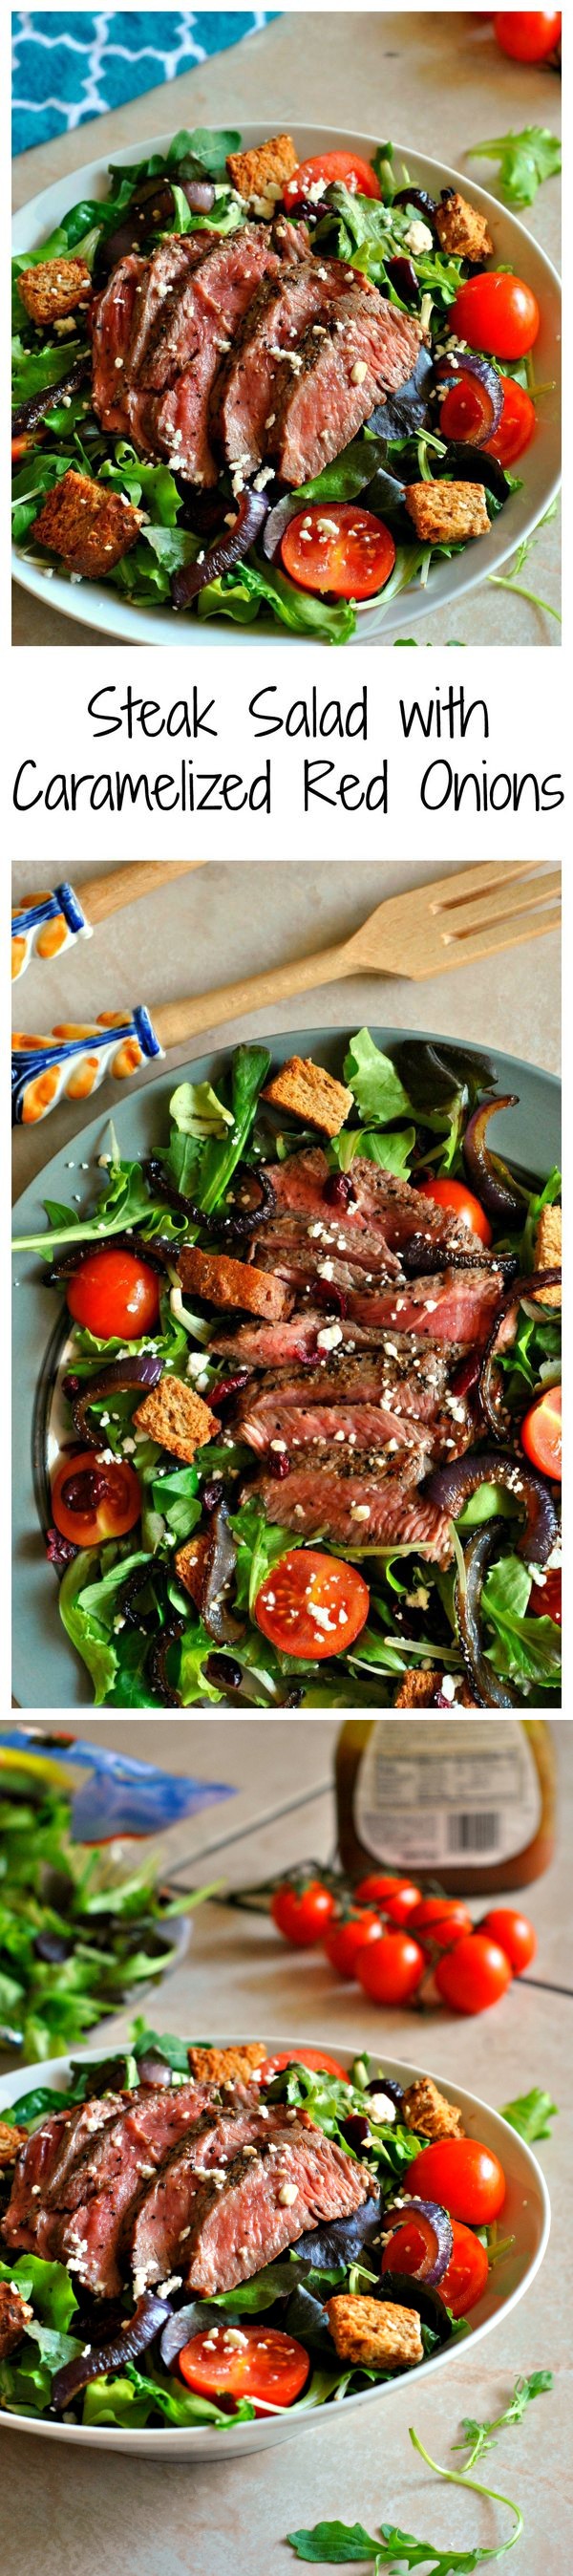 Steak Salad with Caramelized Red Onions